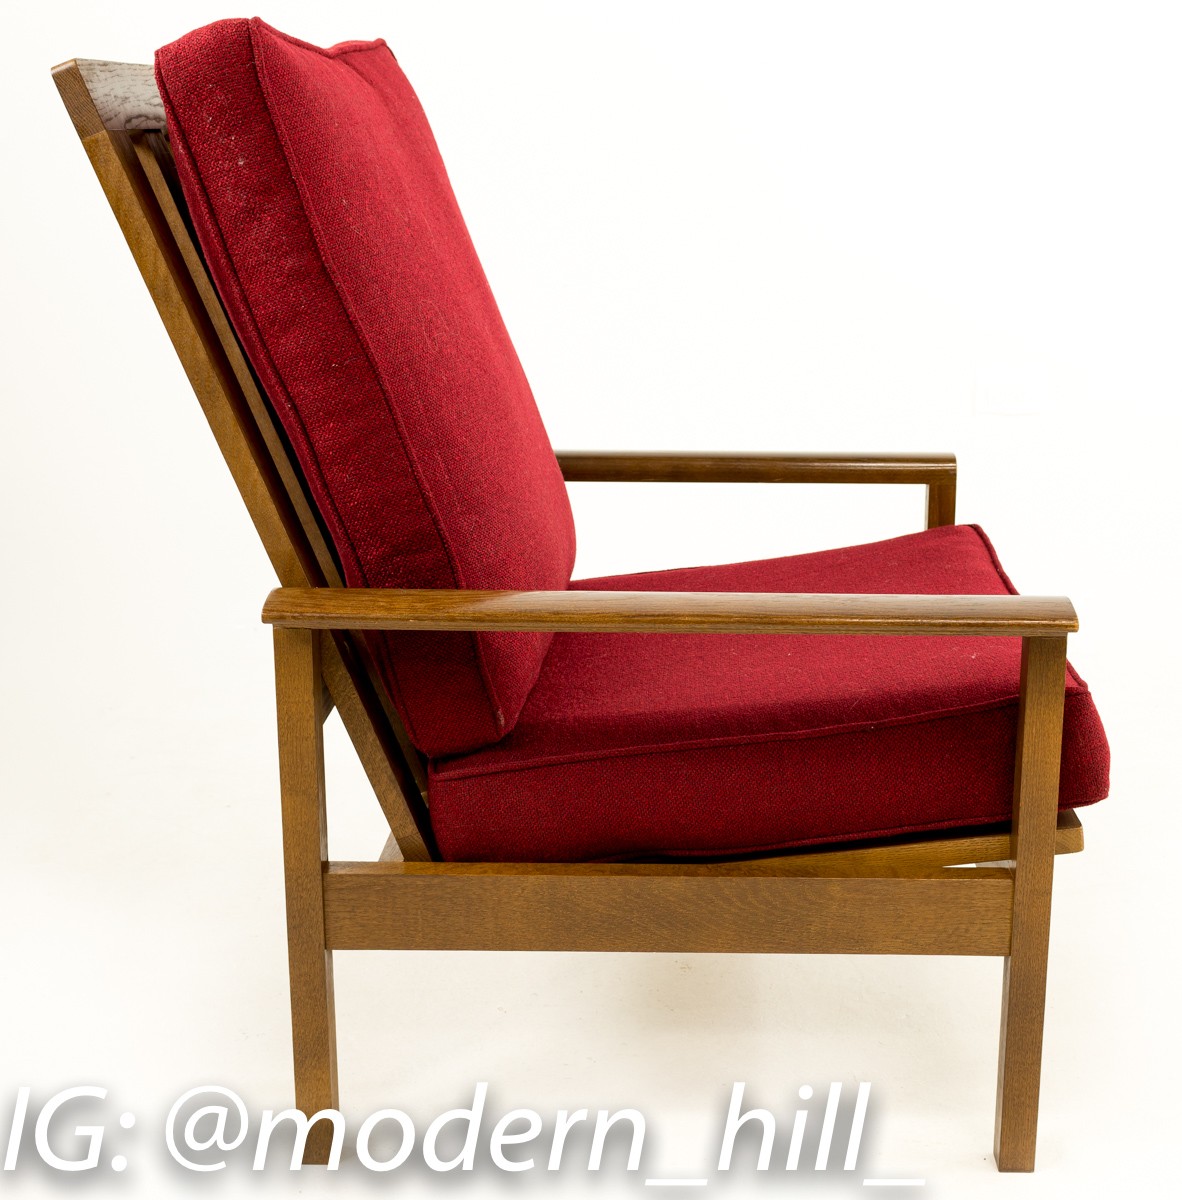 Mid-century High Back Lounge Chairs